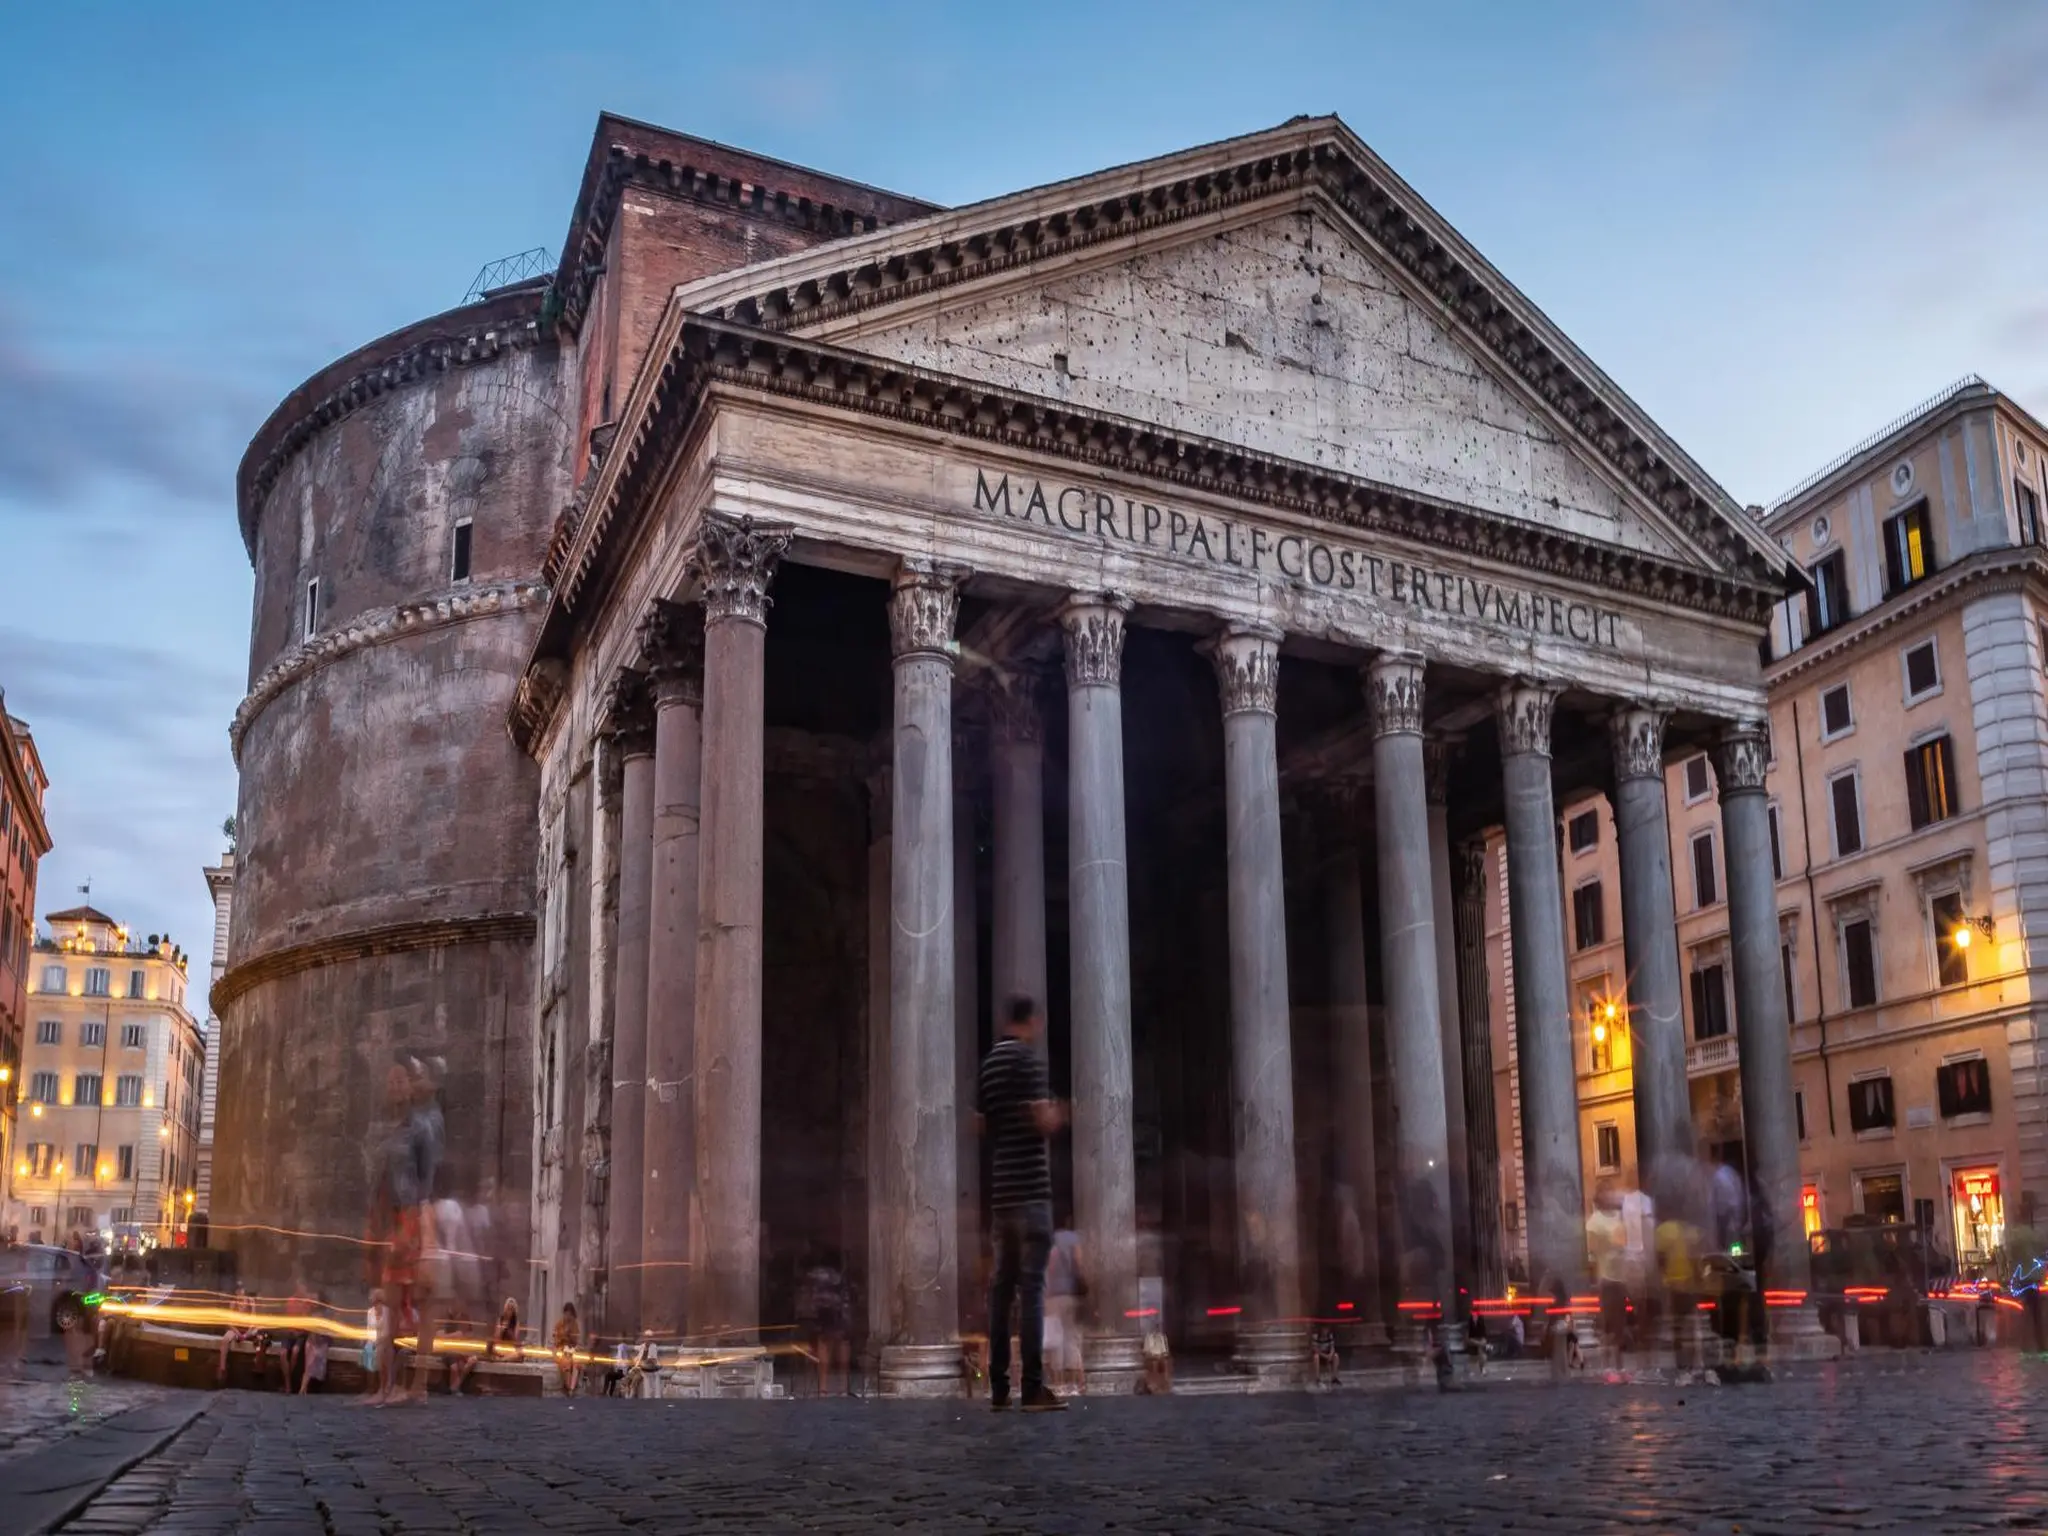 Beginning this week, visitors to Rome's Pantheon will be required to pay an entrance Extra fee